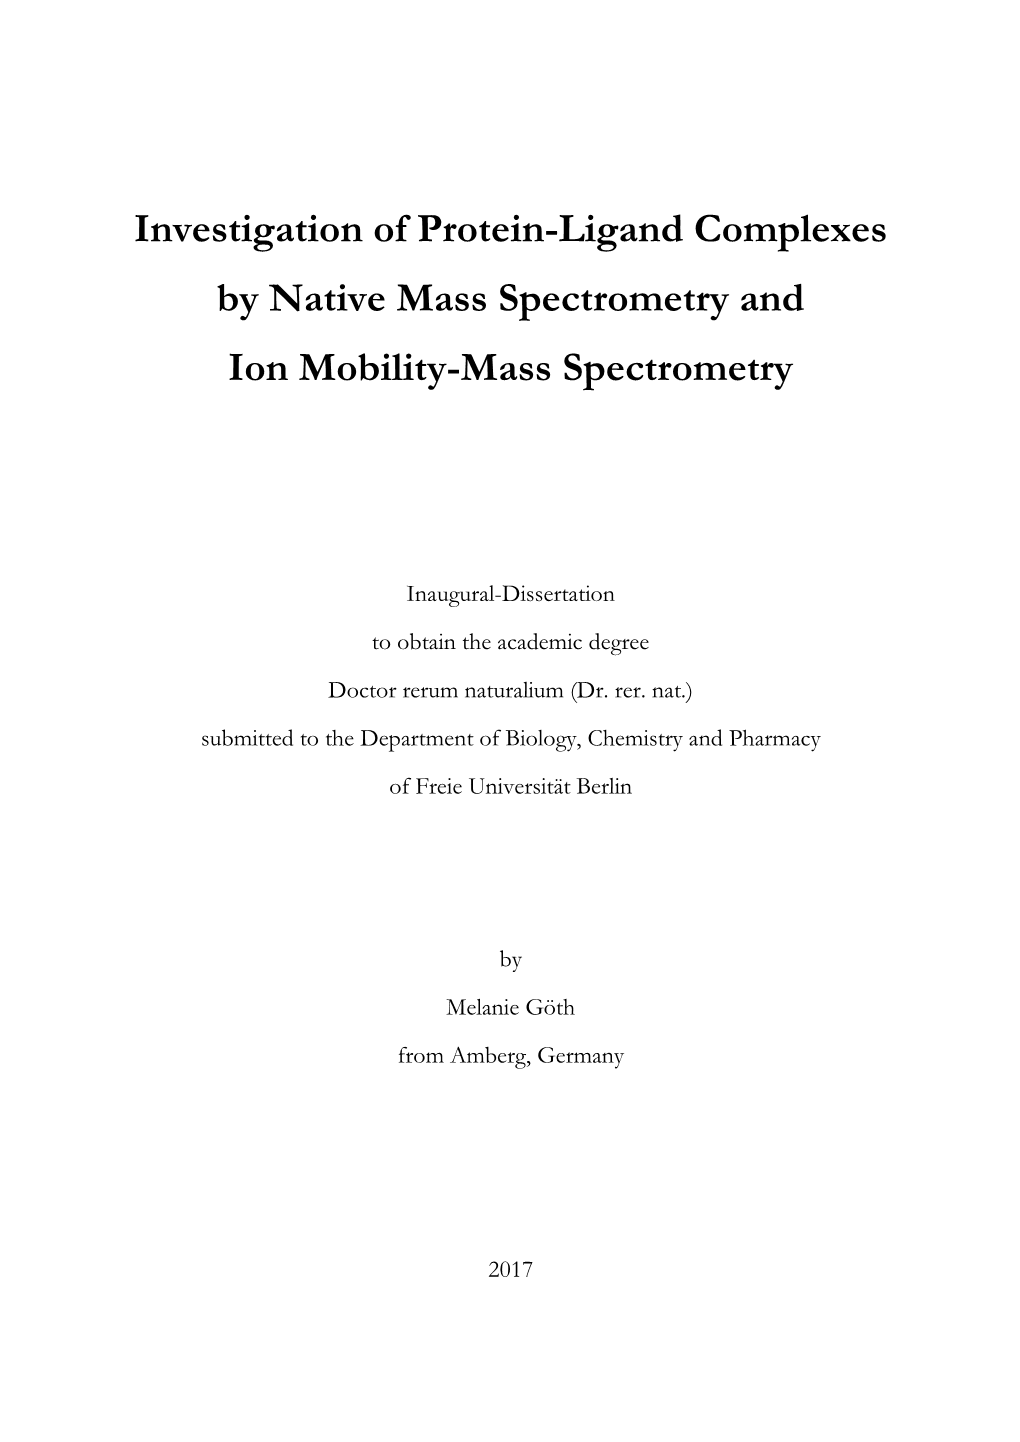 Investigation of Protein-Ligand Complexes by Native Mass Spectrometry and Ion Mobility-Mass Spectrometry